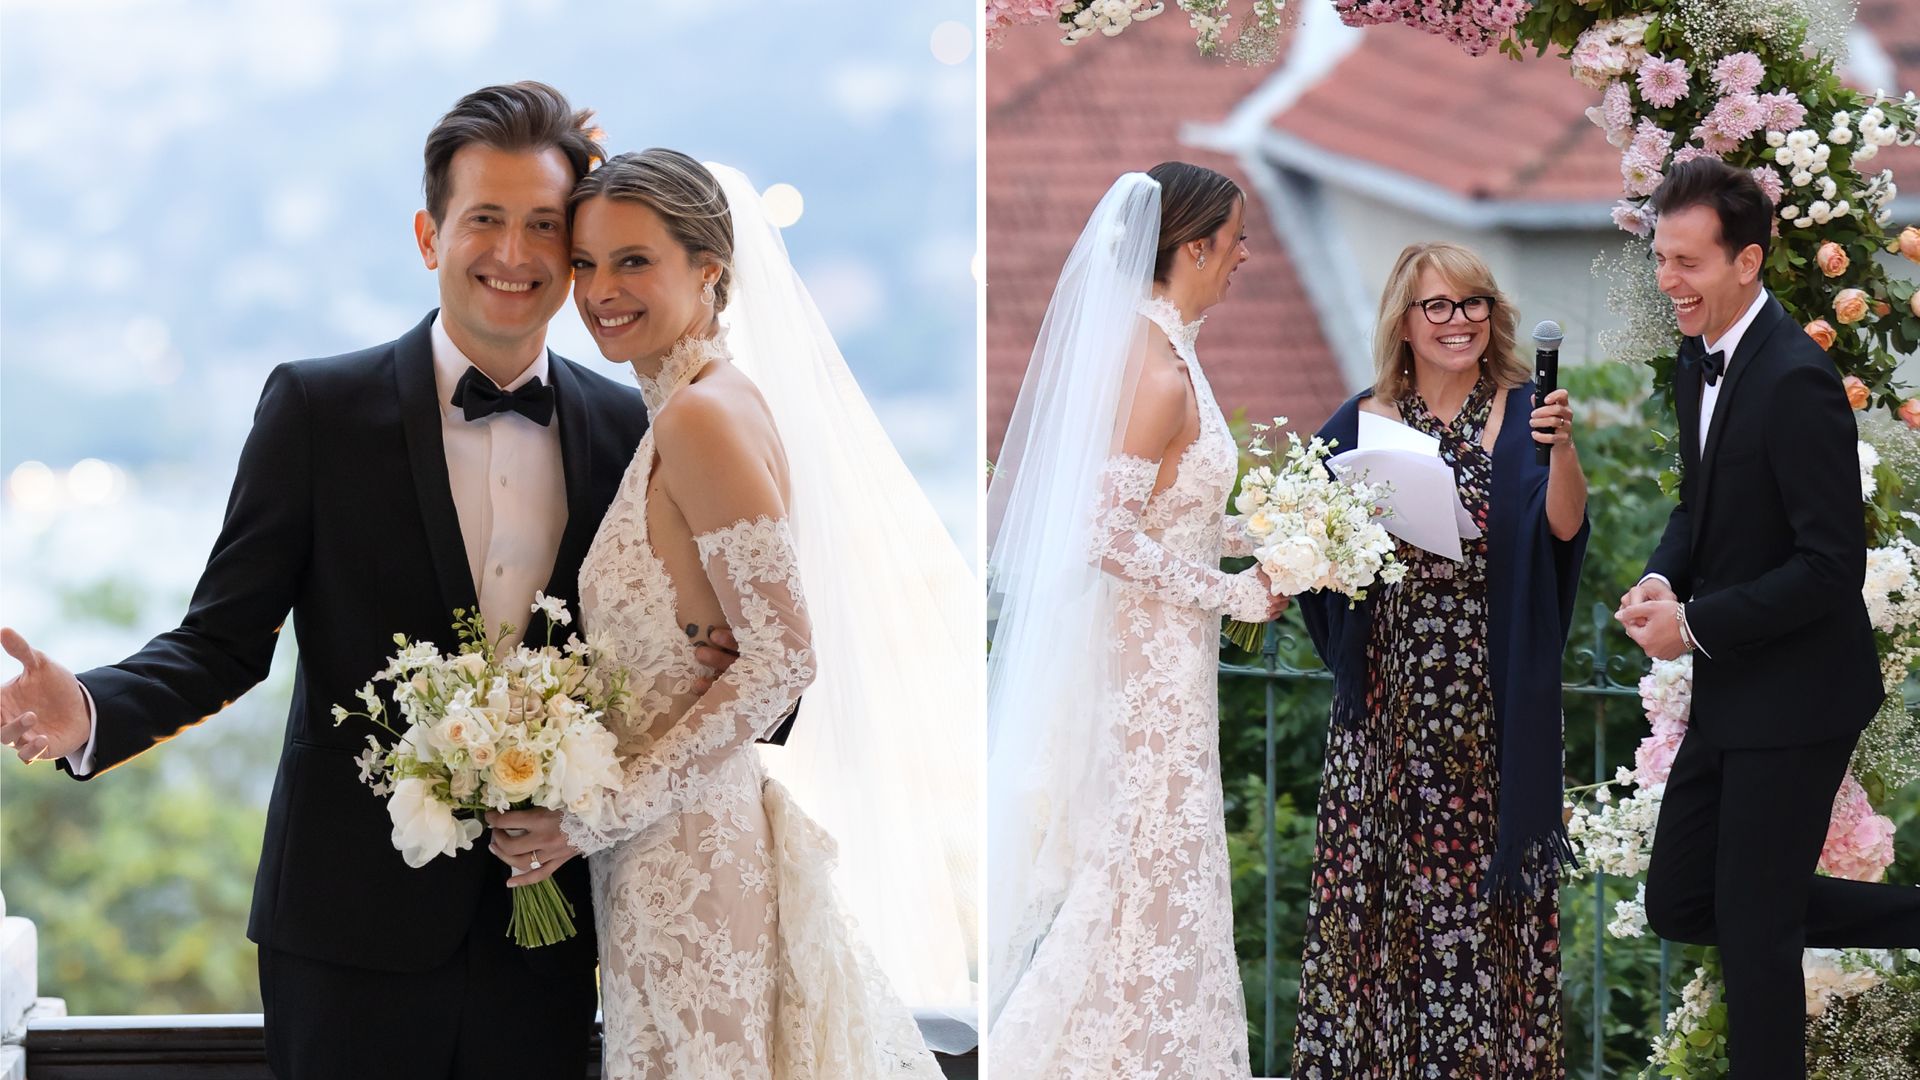  Inside Peter Cincotti and Zeynep Onaran's postcard perfect wedding - where Katie Couric officiated